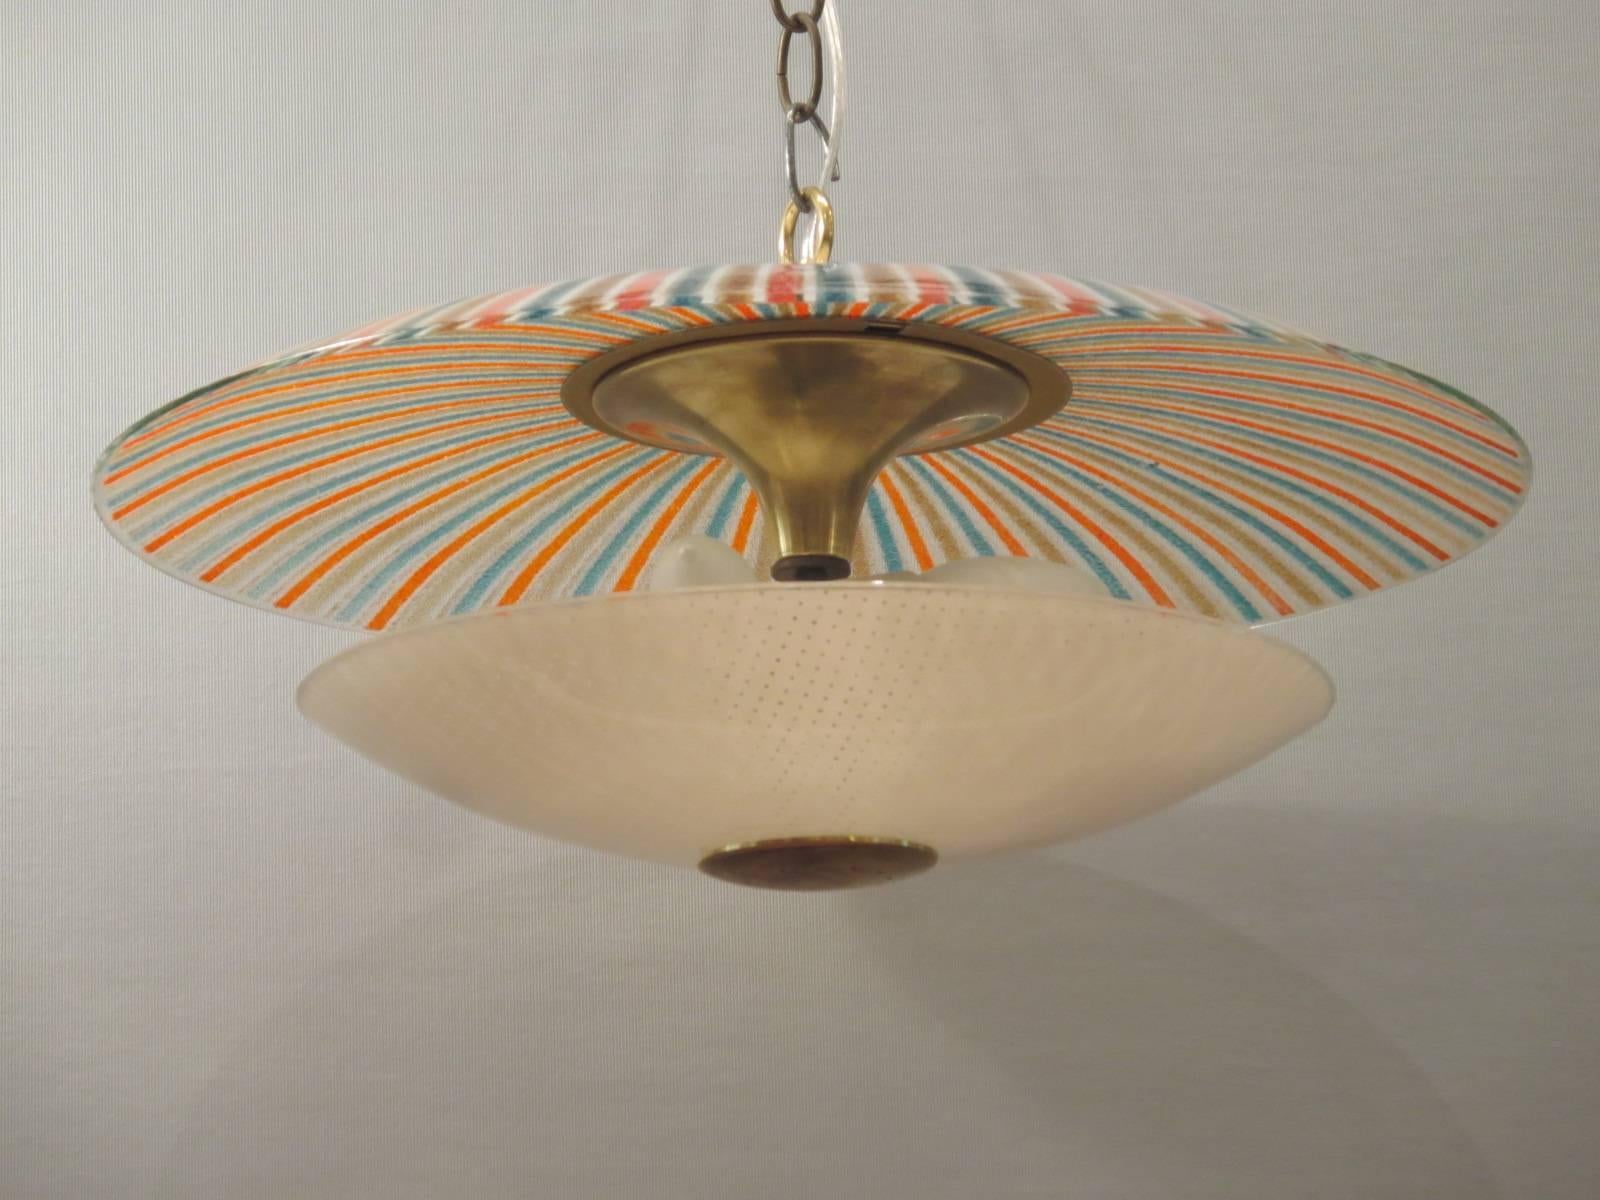 Lovely 1950s light fixture with a striking alternating stripe pattern of three colors as the top part of the fixture with a pierced glass bottom. Both top and bottom are connected with brass. Holds three bulbs. Beautiful when illuminated or not.